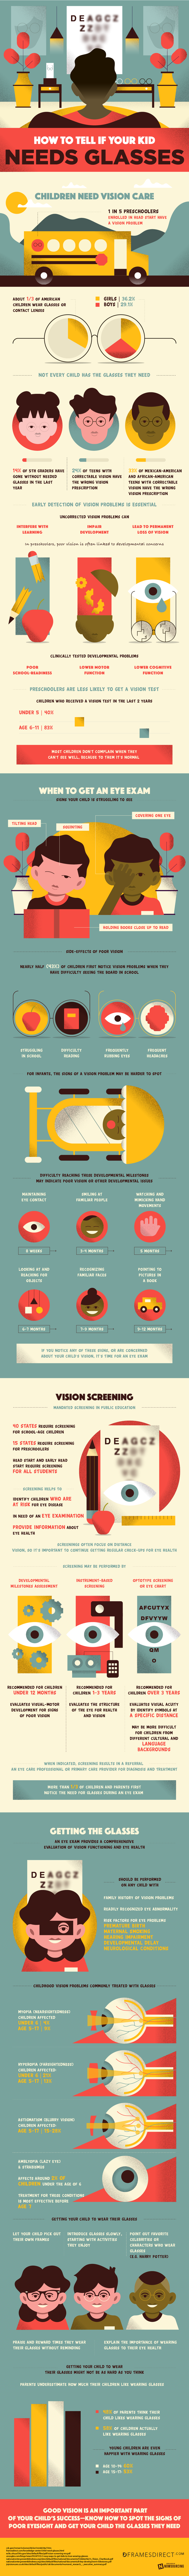 Does Your Kid Needs Glasses? Watch the Signs! - Infographic